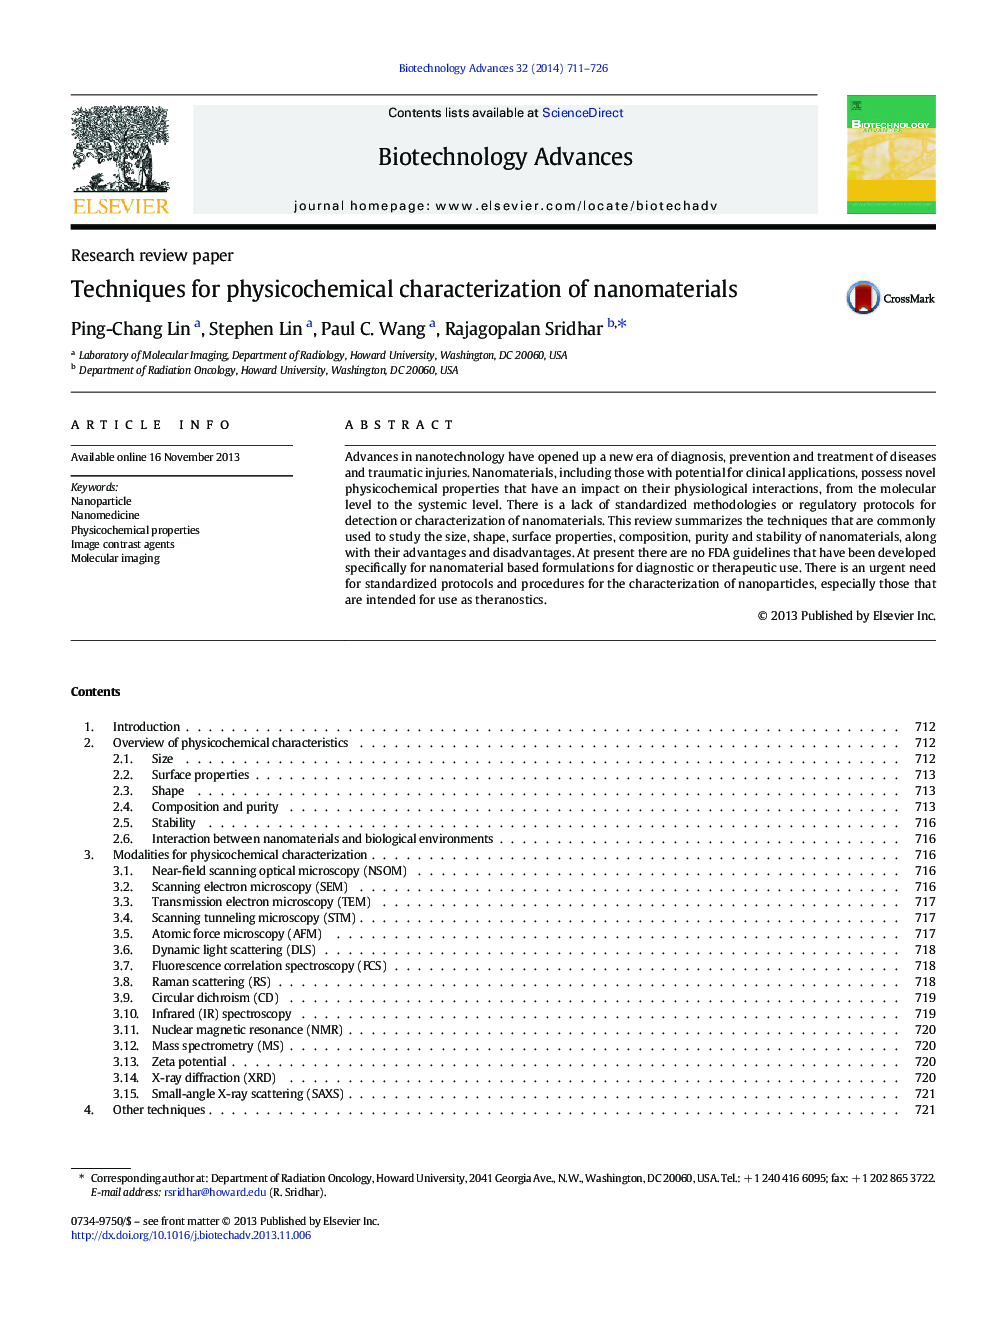 Techniques for physicochemical characterization of nanomaterials